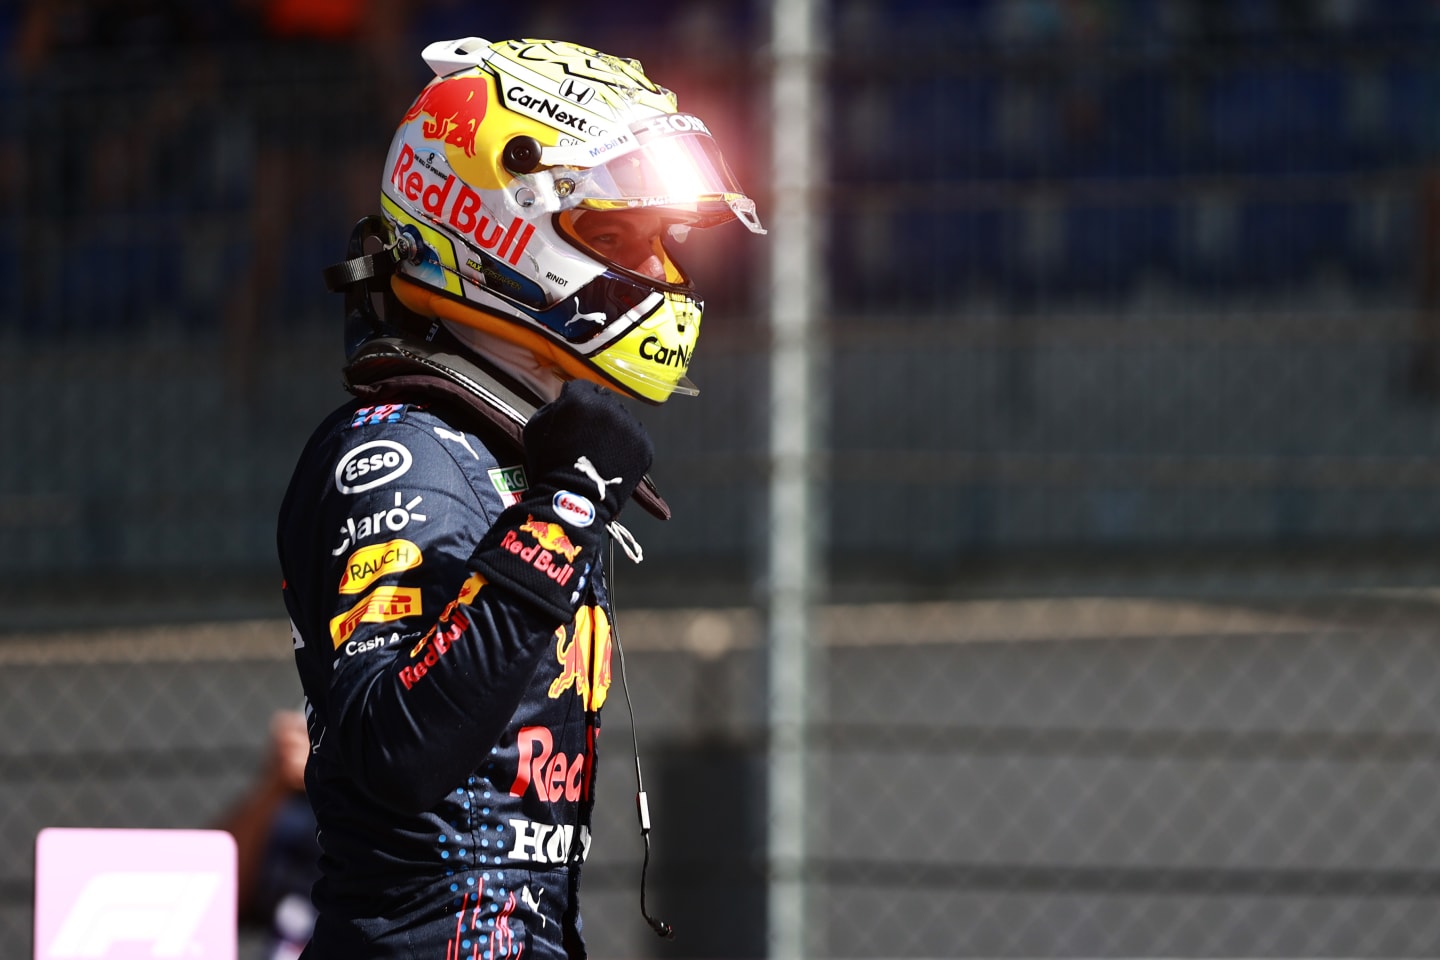 SPIELBERG, AUSTRIA - JUNE 26: Pole position qualifier Max Verstappen of Netherlands and Red Bull Racing celebrates in parc ferme during qualifying ahead of the F1 Grand Prix of Styria at Red Bull Ring on June 26, 2021 in Spielberg, Austria. (Photo by Mark Thompson/Getty Images)